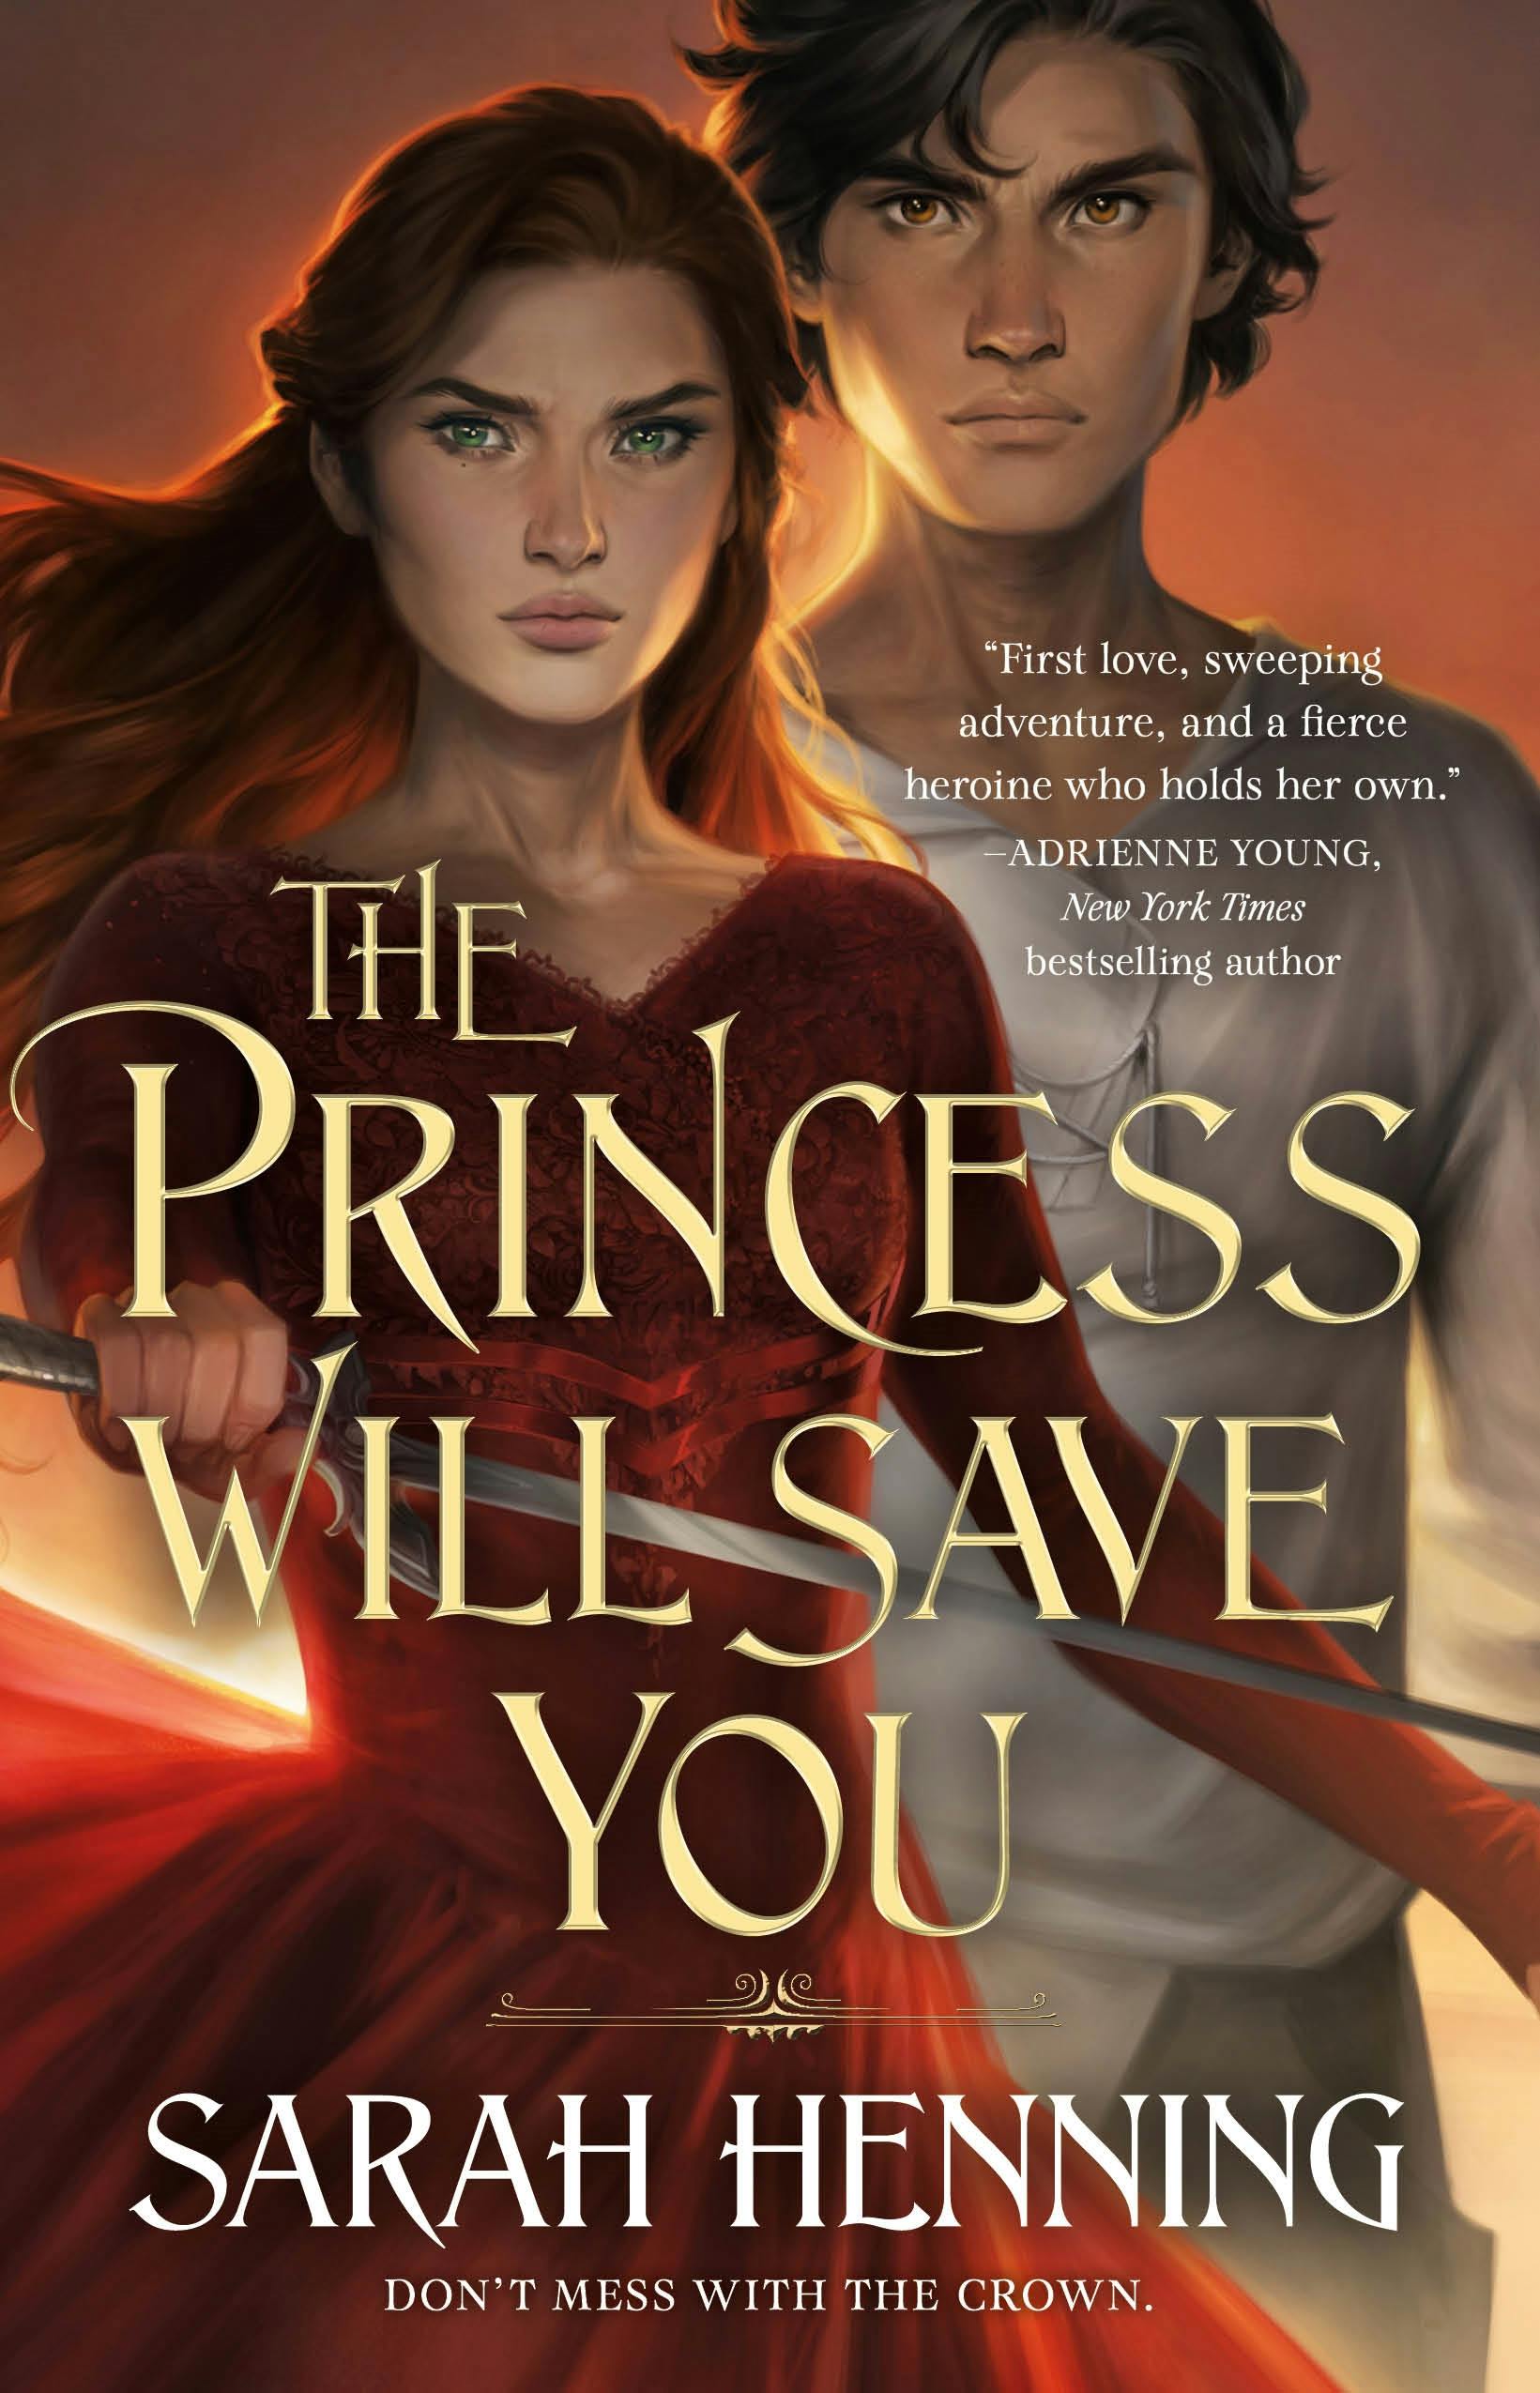 Cover for the book titled as: The Princess Will Save You